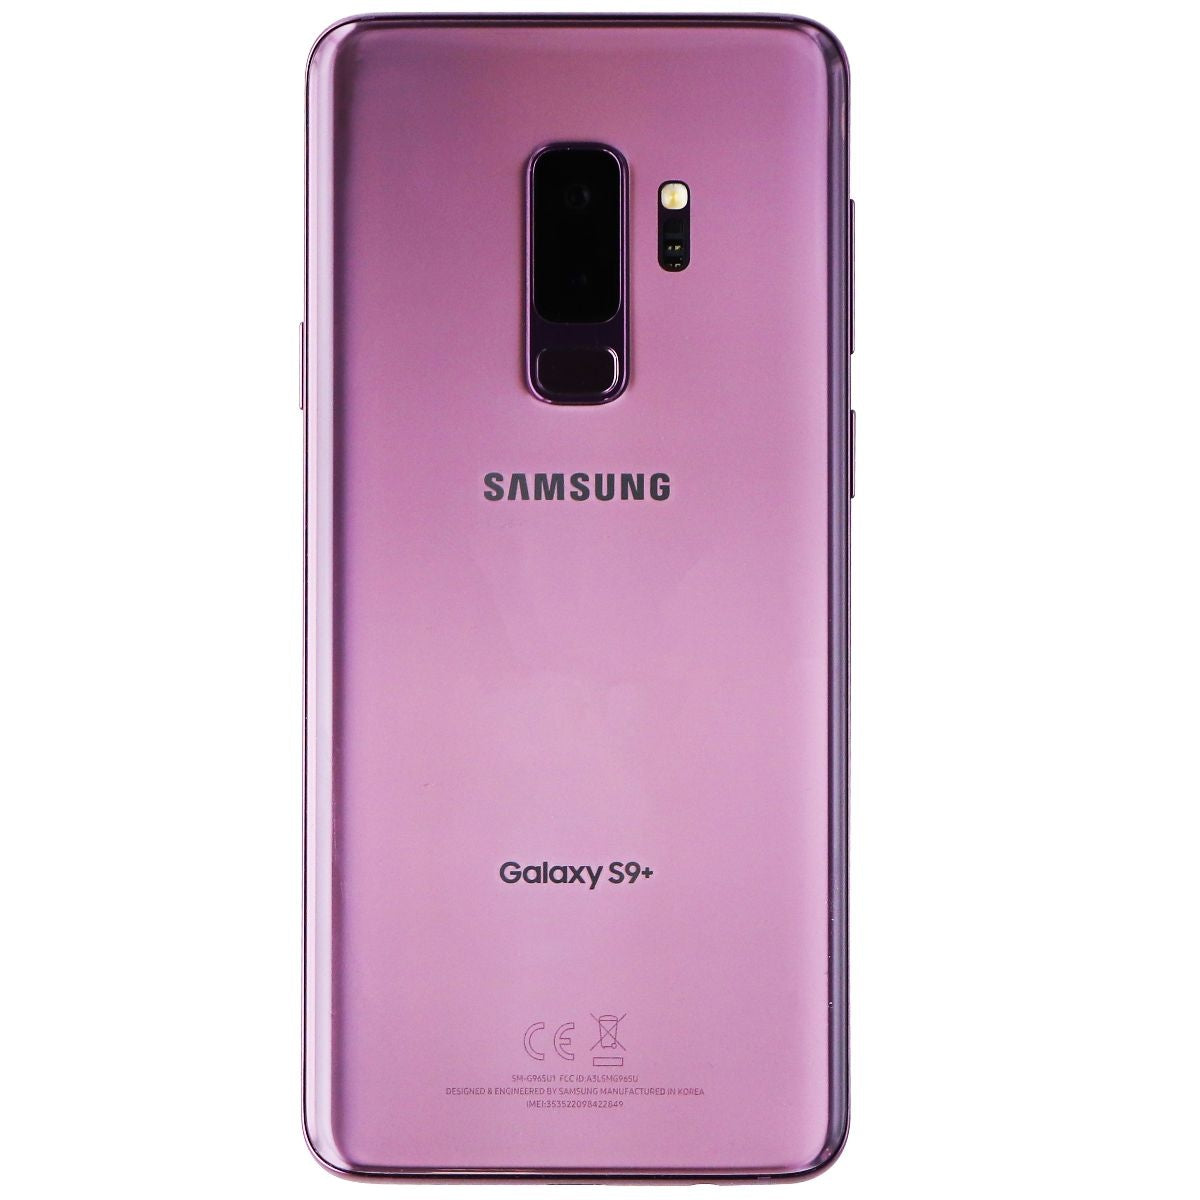 Samsung Galaxy S9+ (6.2-in) Smartphone (SM-G965U) Unlocked - 64GB / Lilac Purple Cell Phones & Smartphones Samsung    - Simple Cell Bulk Wholesale Pricing - USA Seller